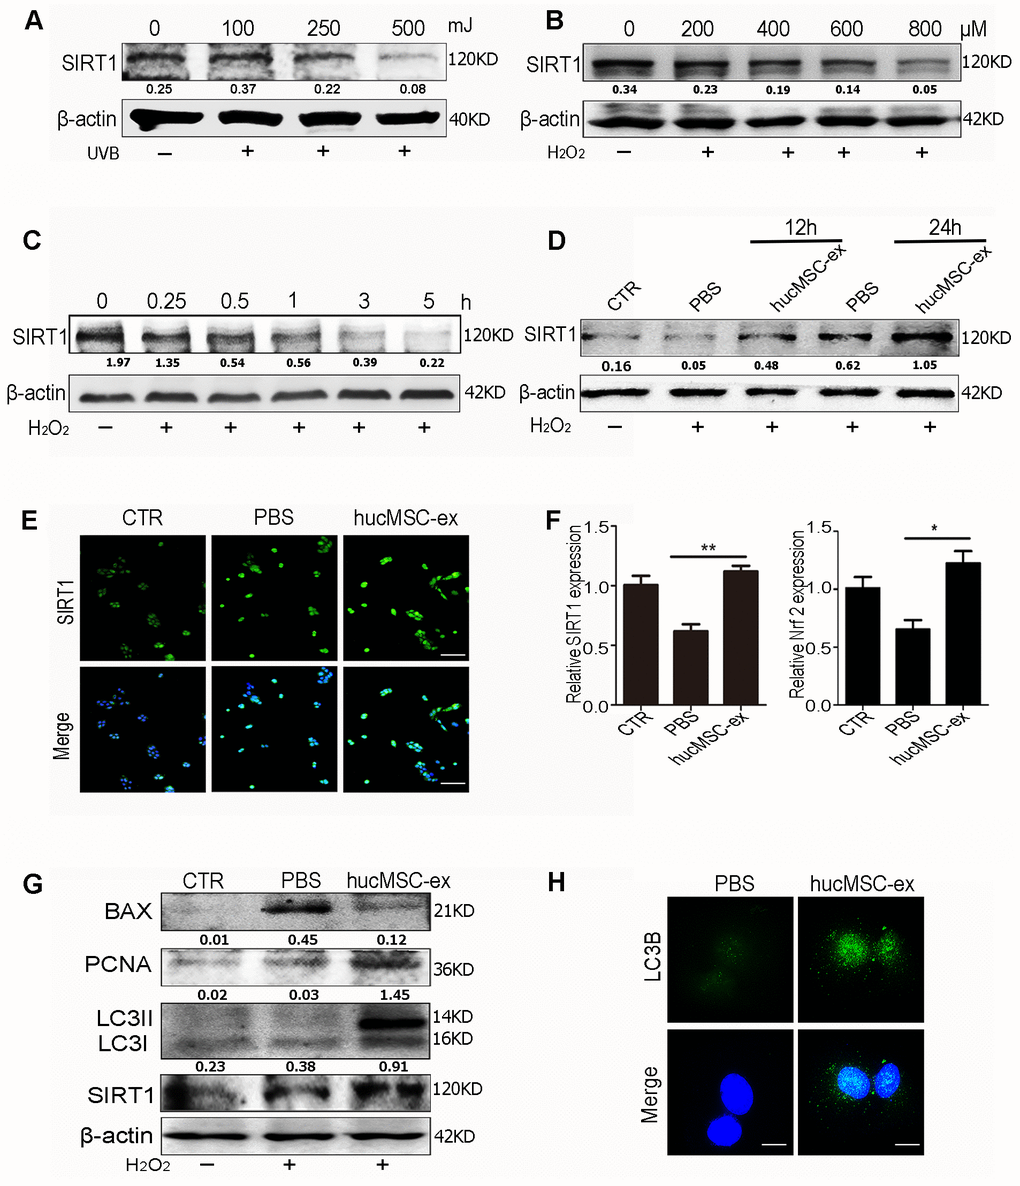 HucMSC-ex promote SIRT1 expression level under oxidative stress and activates autophagy to alleviate HaCaT cells damage. (A) Western blot analysis of SIRT1 expression level in HaCaT cells treated with different intensity of UVB. (B) Western blot analysis of SIRT1 expression level in HaCaT cells treated with different concentrations of H2O2. (C) Western blot detection of SIRT1 expression level in HaCaT cells treated with H2O2 at different times. (D) Western blot detection of SIRT1 expression level after H2O2 treatment of HaCaT cells at different times. (E) Immunofluorescence detection of SIRT1 expression level after H2O2 treatment of HaCaT cells. (F) qRT-PCR was used to detect the expression level of SIRT1 and Nrf2 mRNA of HaCaT cells after 24hours treatment with H2O2 (n = 3; *p G) Western blot detection of PCNA, Bax, LC3II, LC3I and SIRT1 protein expression level. (H) Immunofluorescence detection of hucMSC-ex effect on autophagy associated protein LC3B expression level.